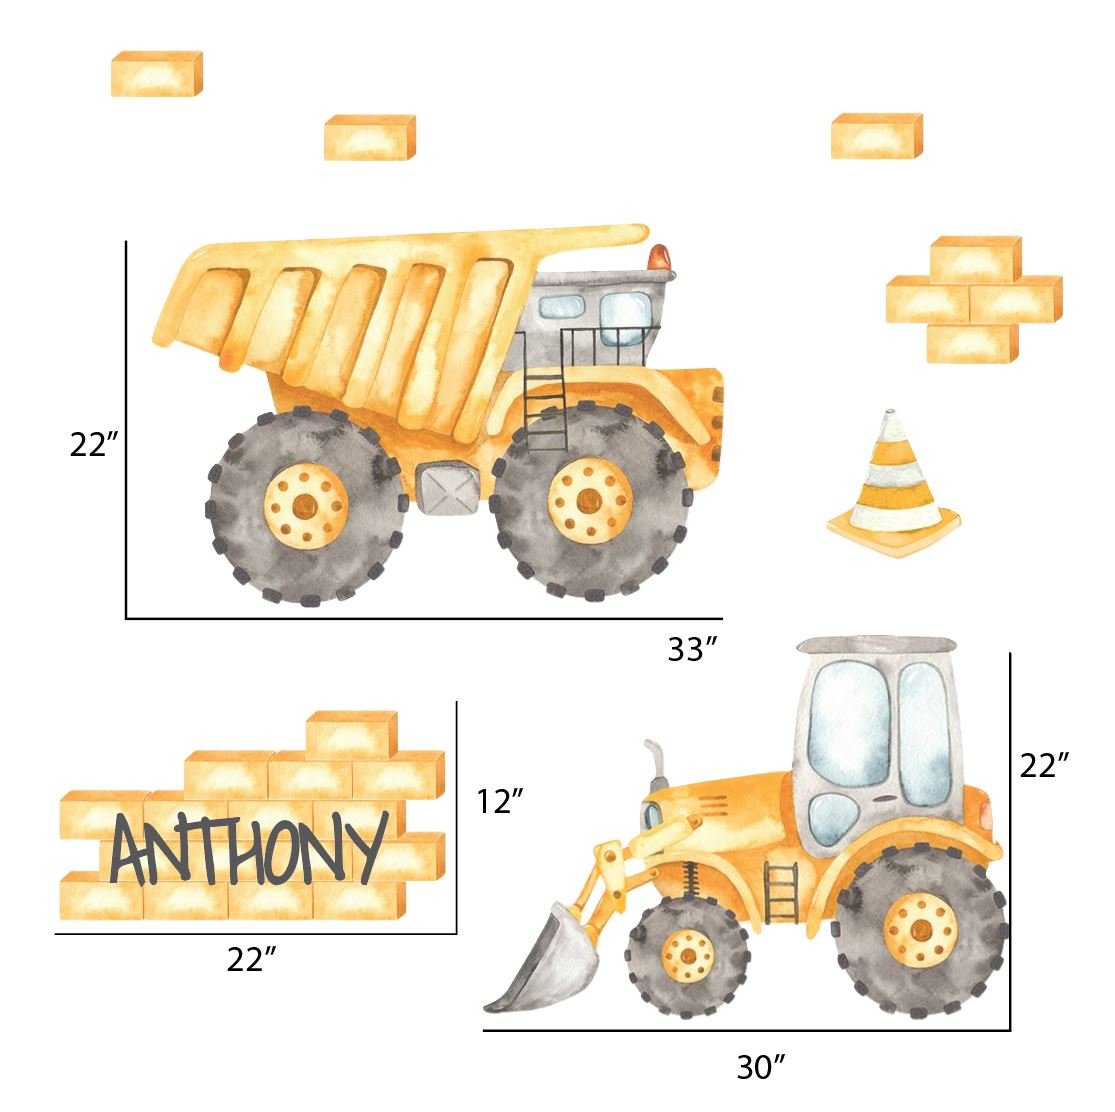 Construction Wall Decals | Bulldozer & Dump Truck | Excavator | Green & Blue - Picture Perfect Decals